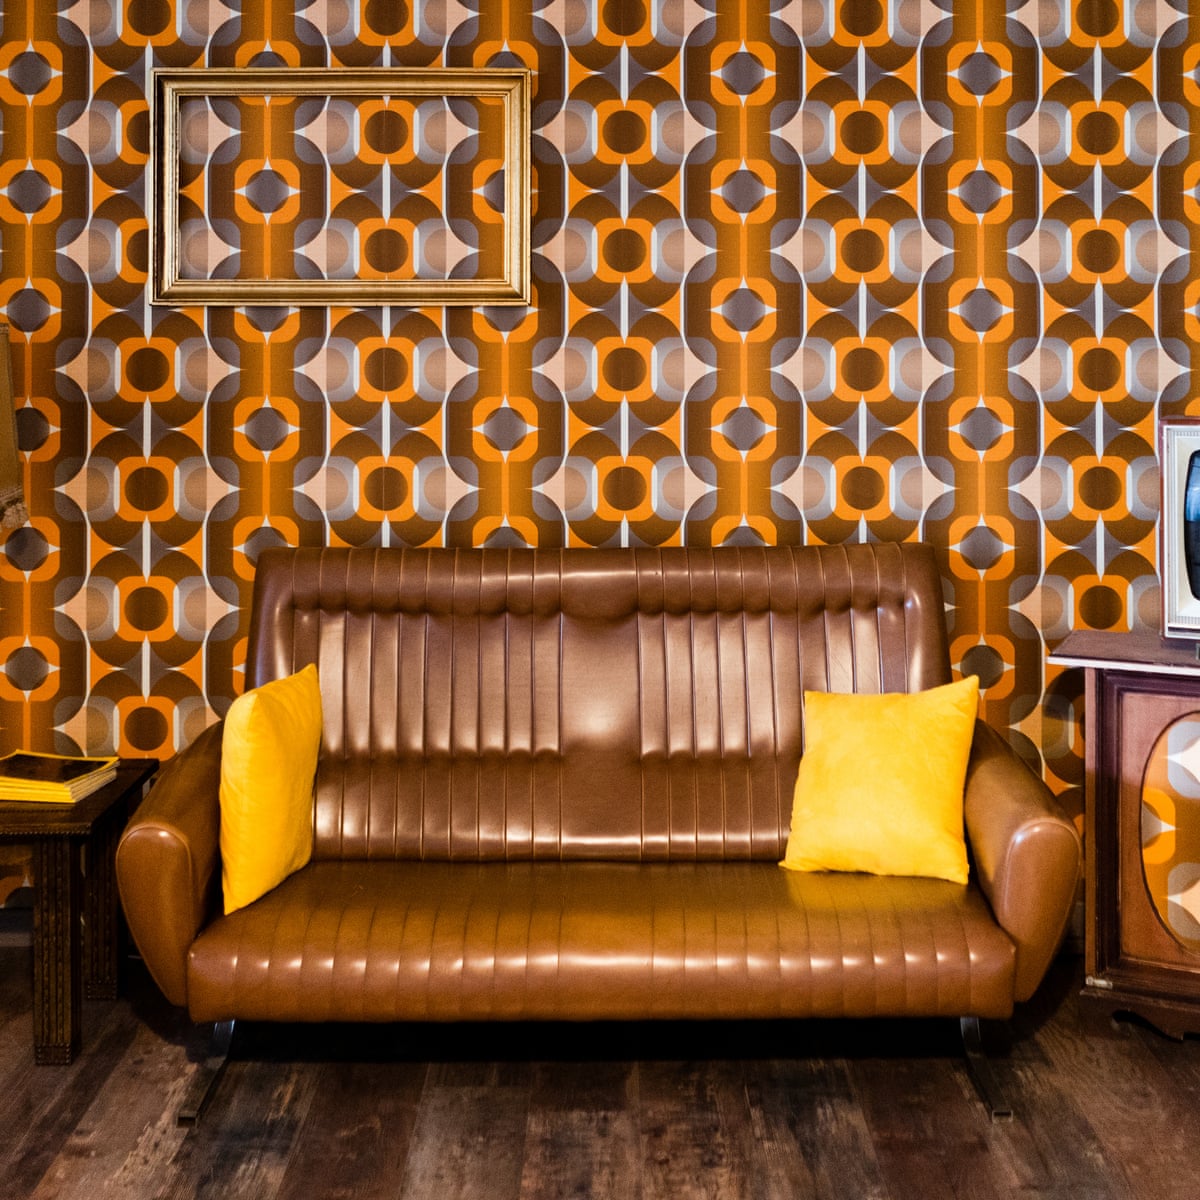 The secondhand home: 15 ways to find the vintage furniture of your dreams |  Homes | The Guardian